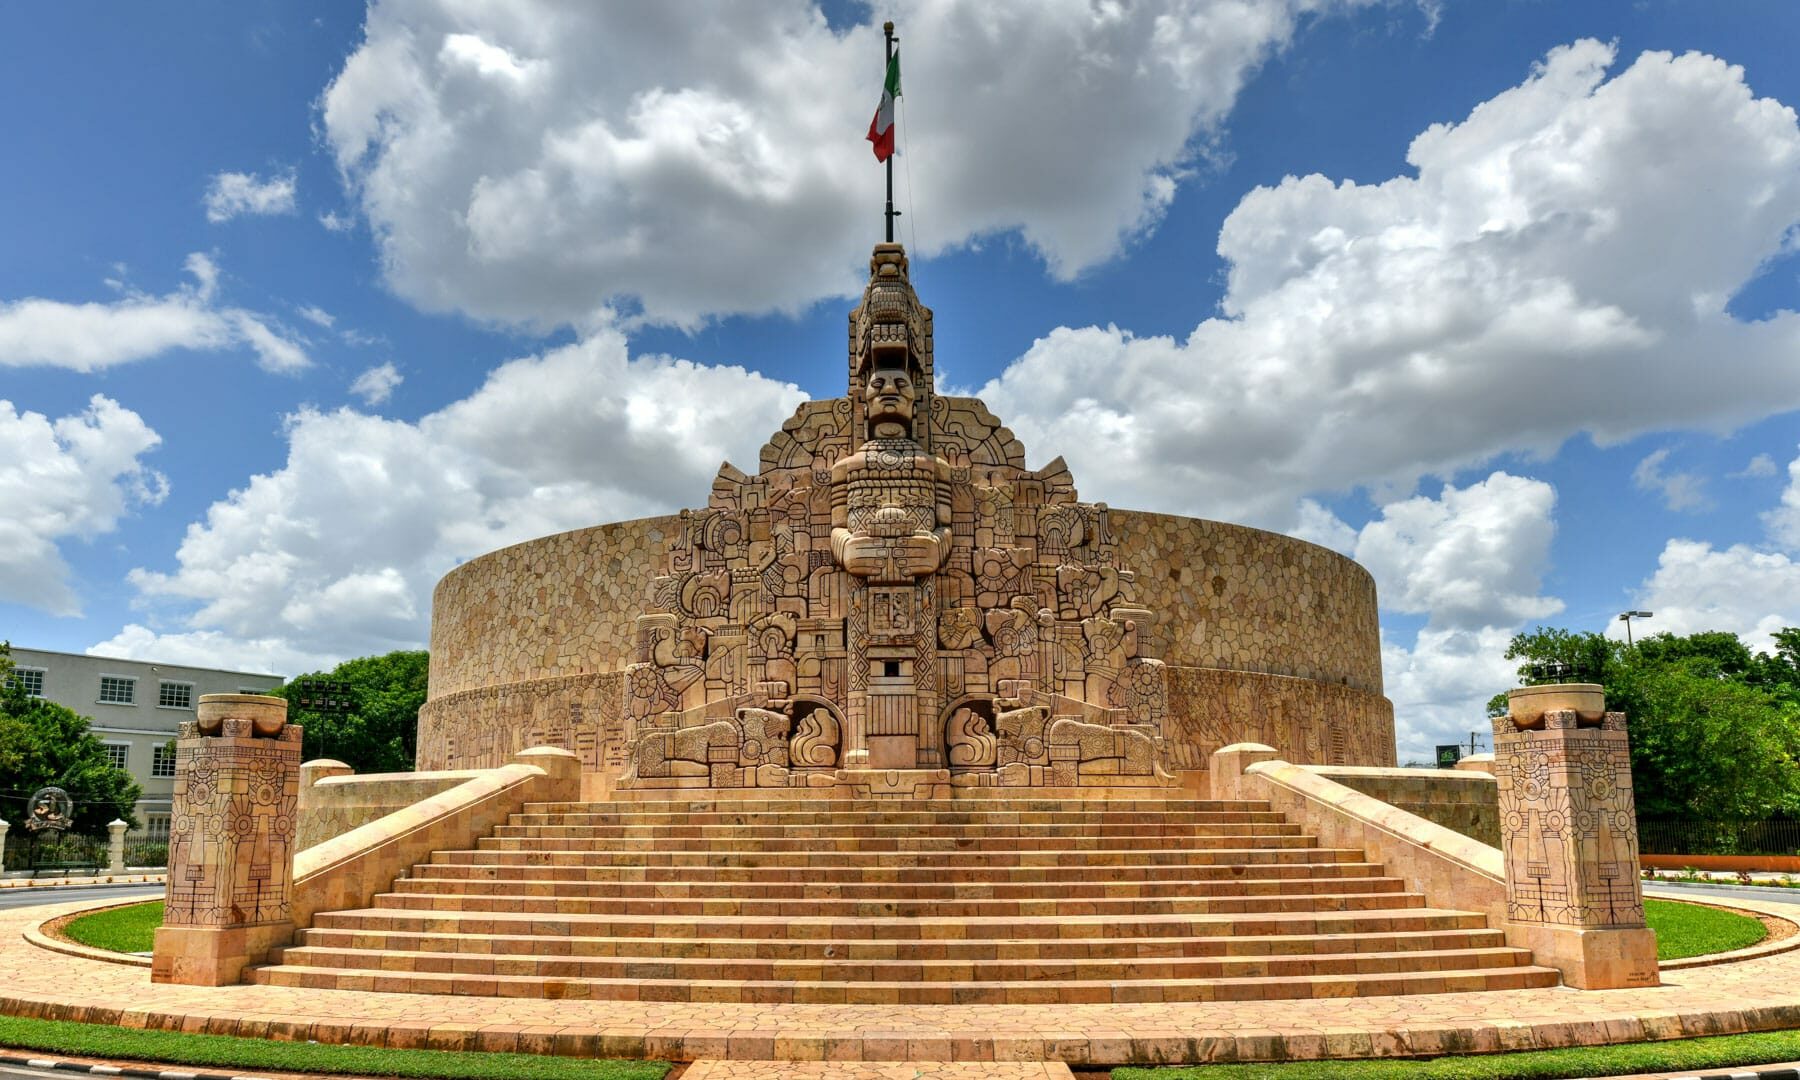 The Best Things to do in Merida, Mexico